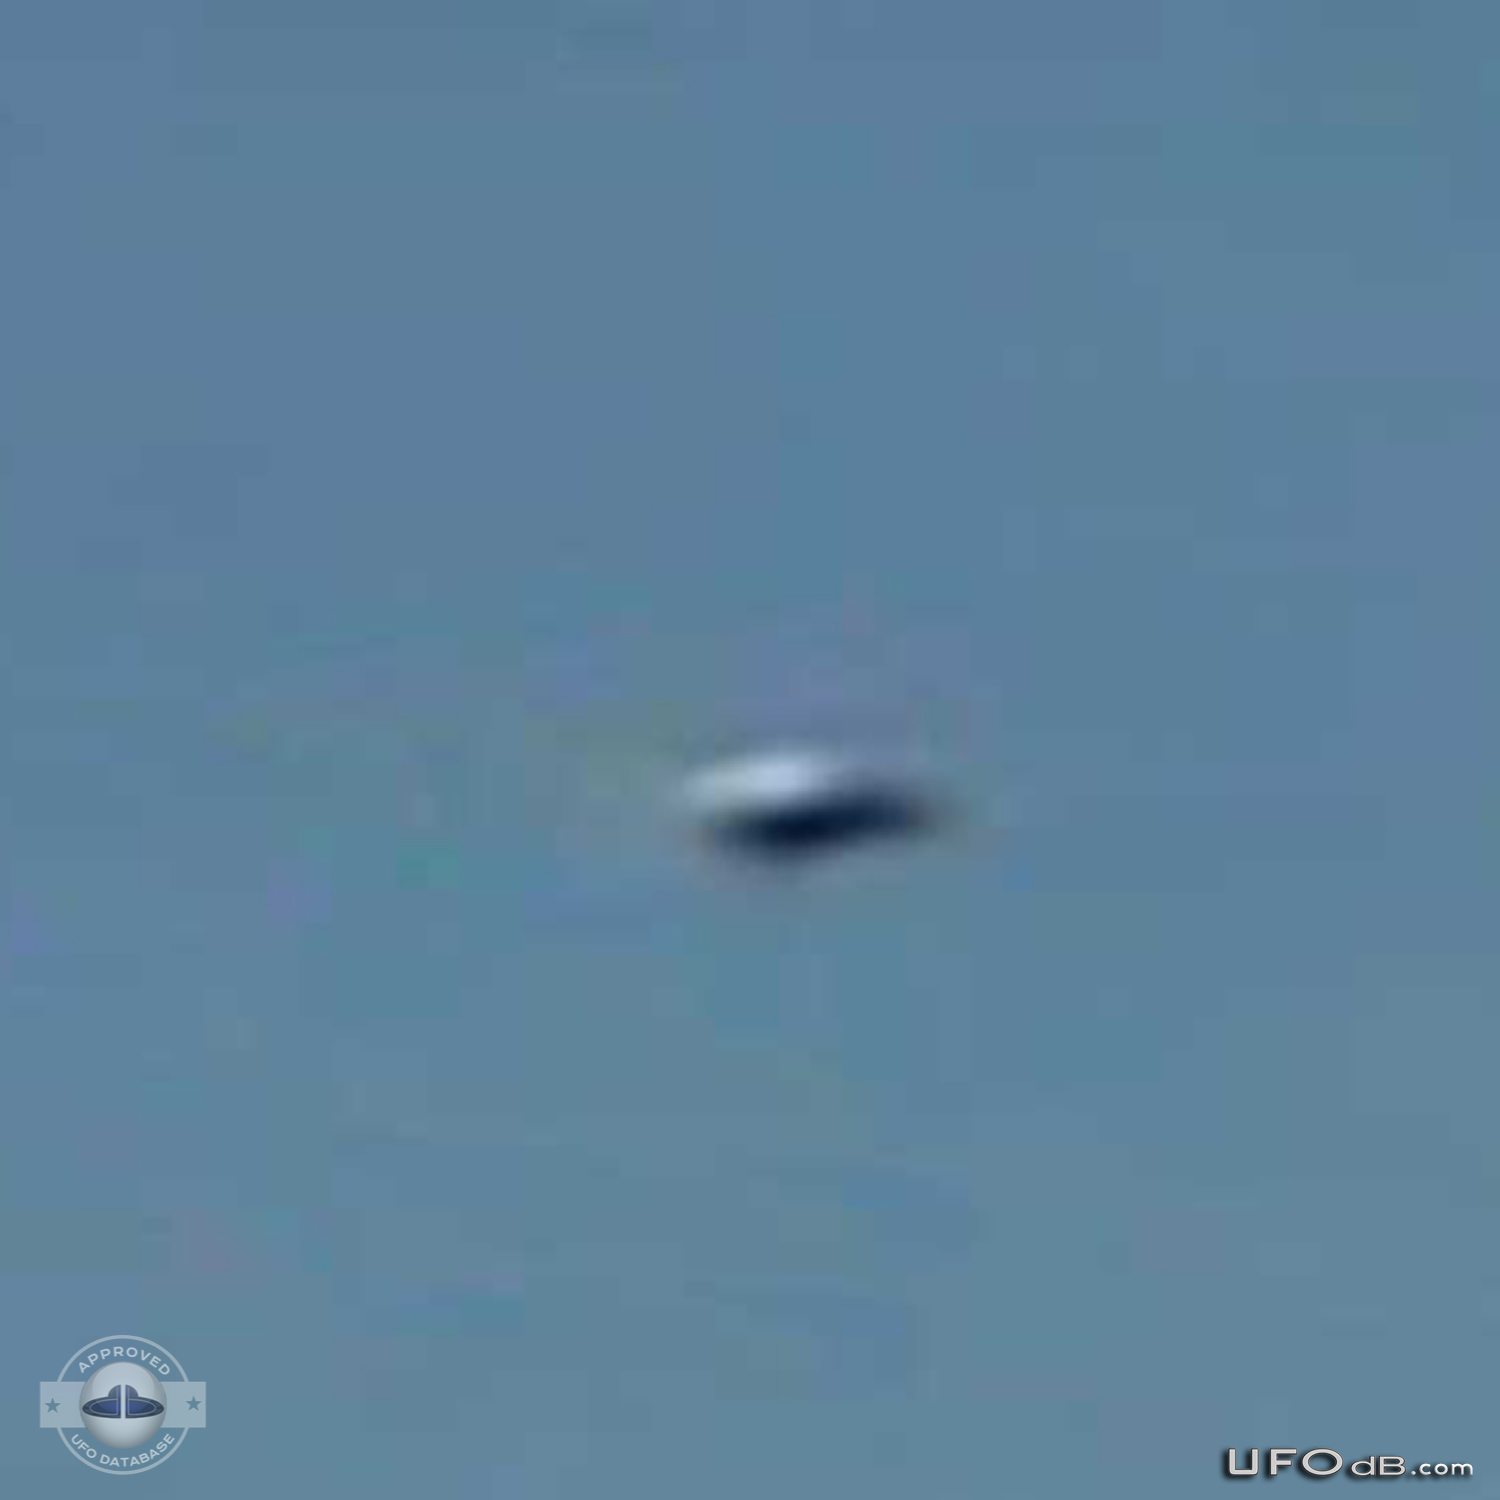 Toutist in Riva del Garda, Italy get a picture of a UFO - October 2011 UFO Picture #382-6